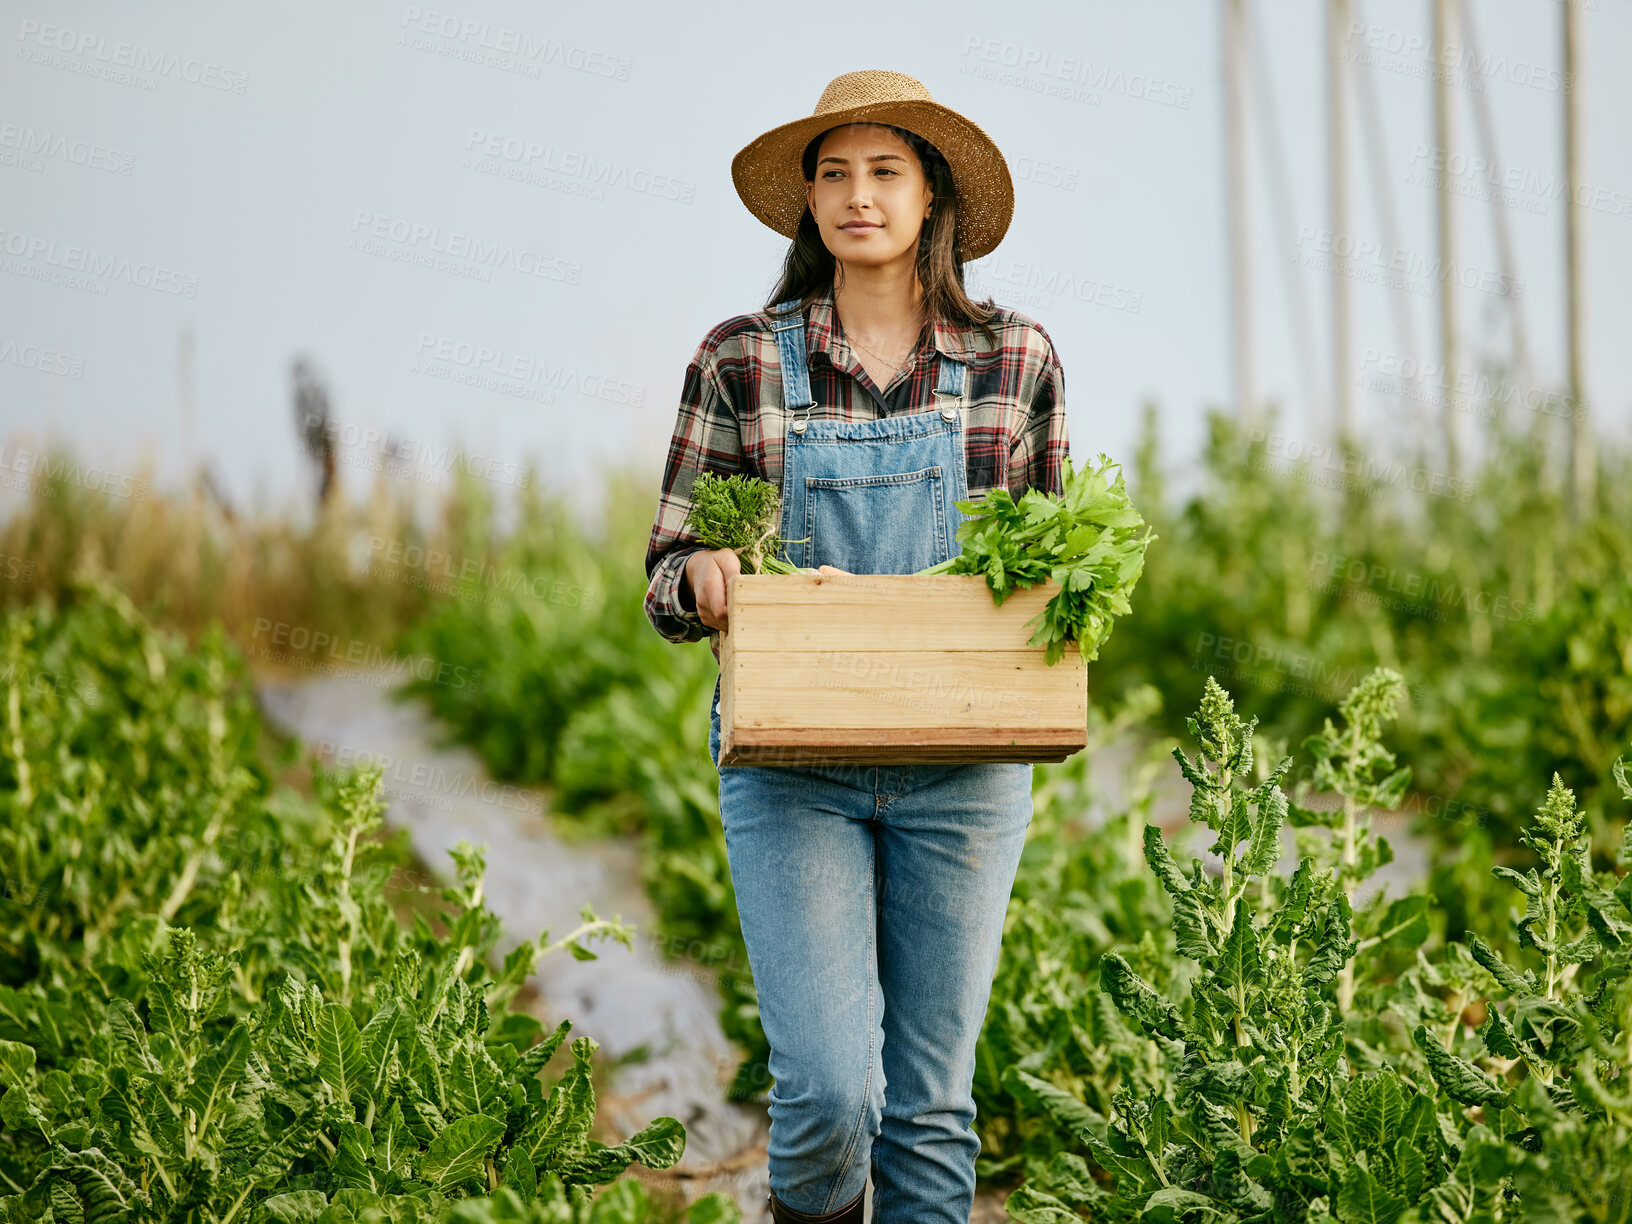 Buy stock photo Shot of a young female farmer carrying freshly harvested produce